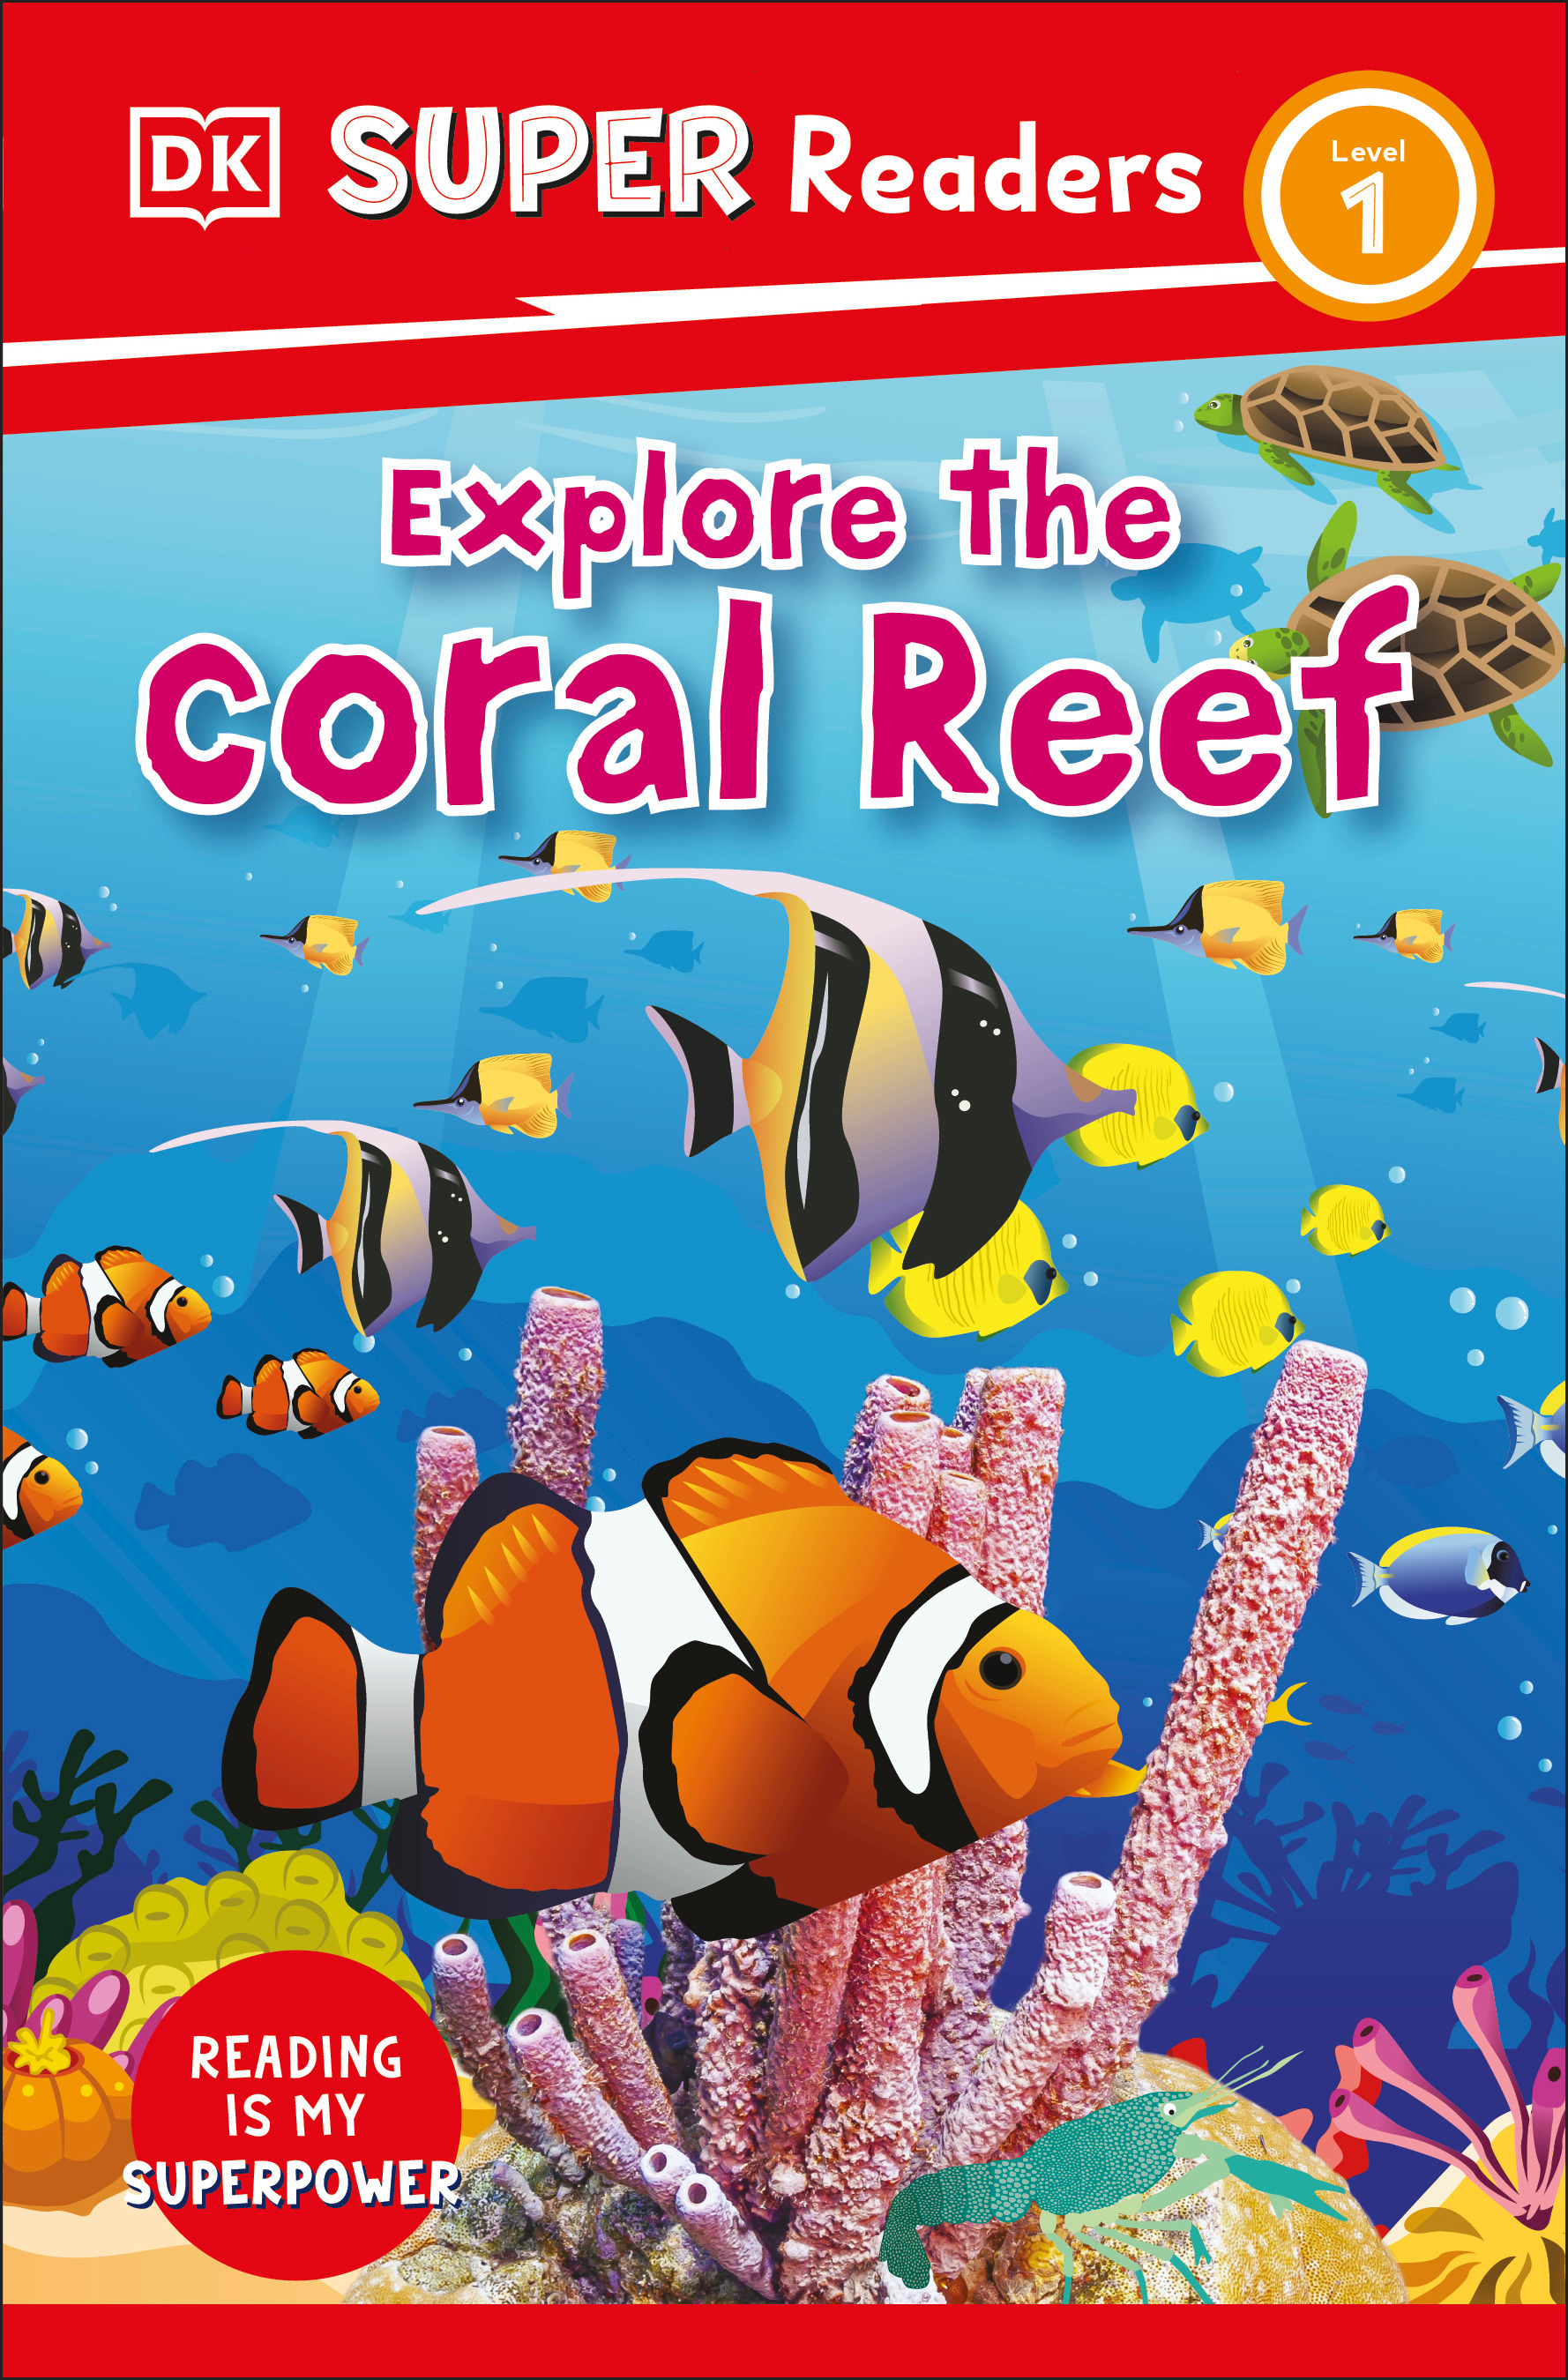 DK Super Readers Level 1 - Explore the Coral Reef | 